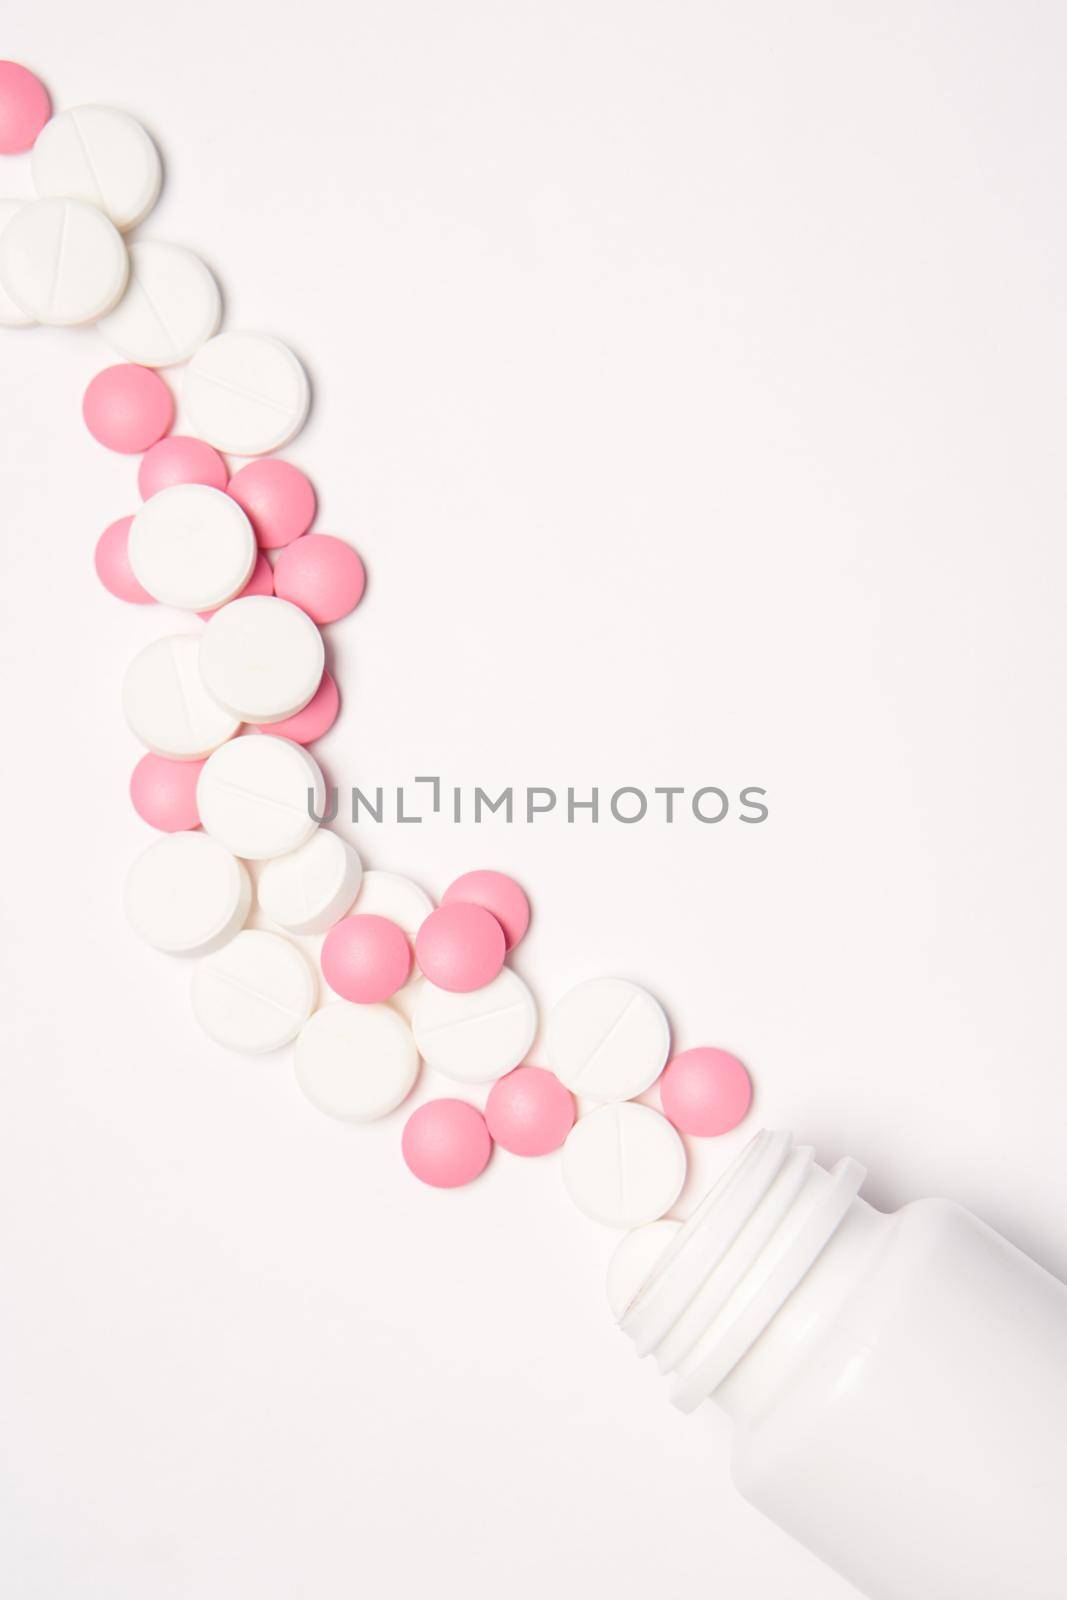 White jar with pills on a light background top view medicine health vitamins. High quality photo